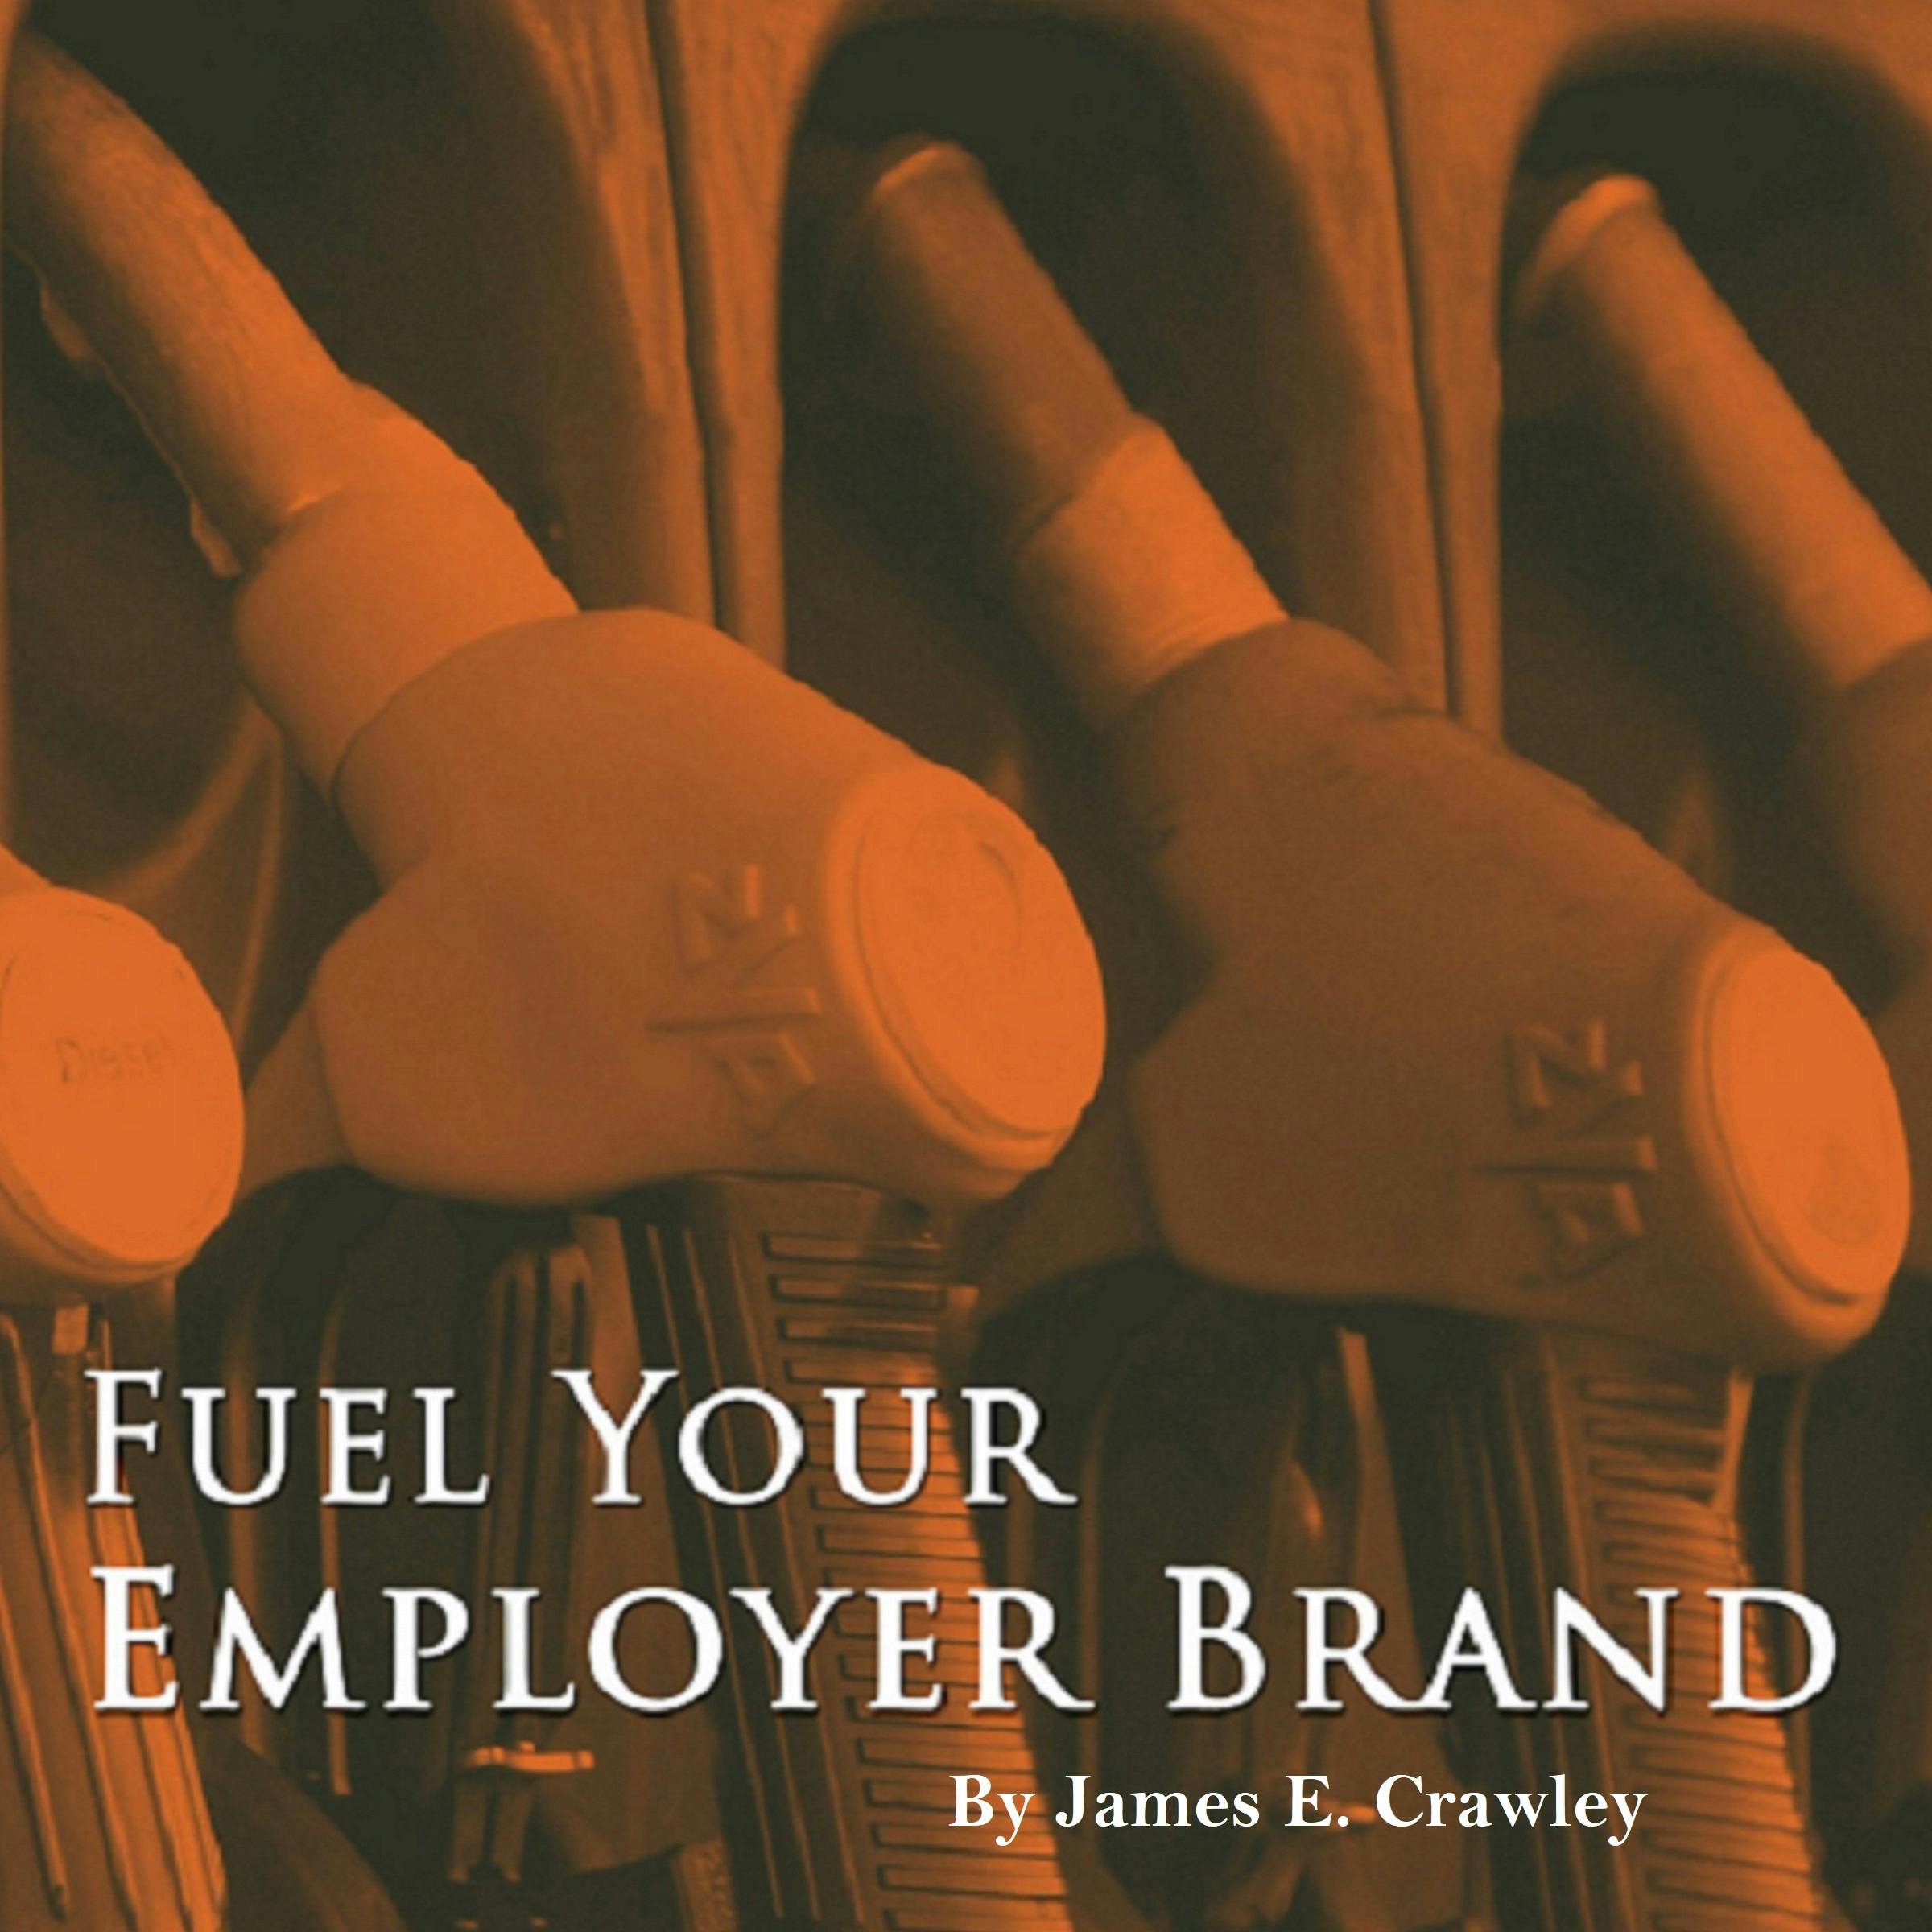 Fuel Your Employer Brand - James Crawley